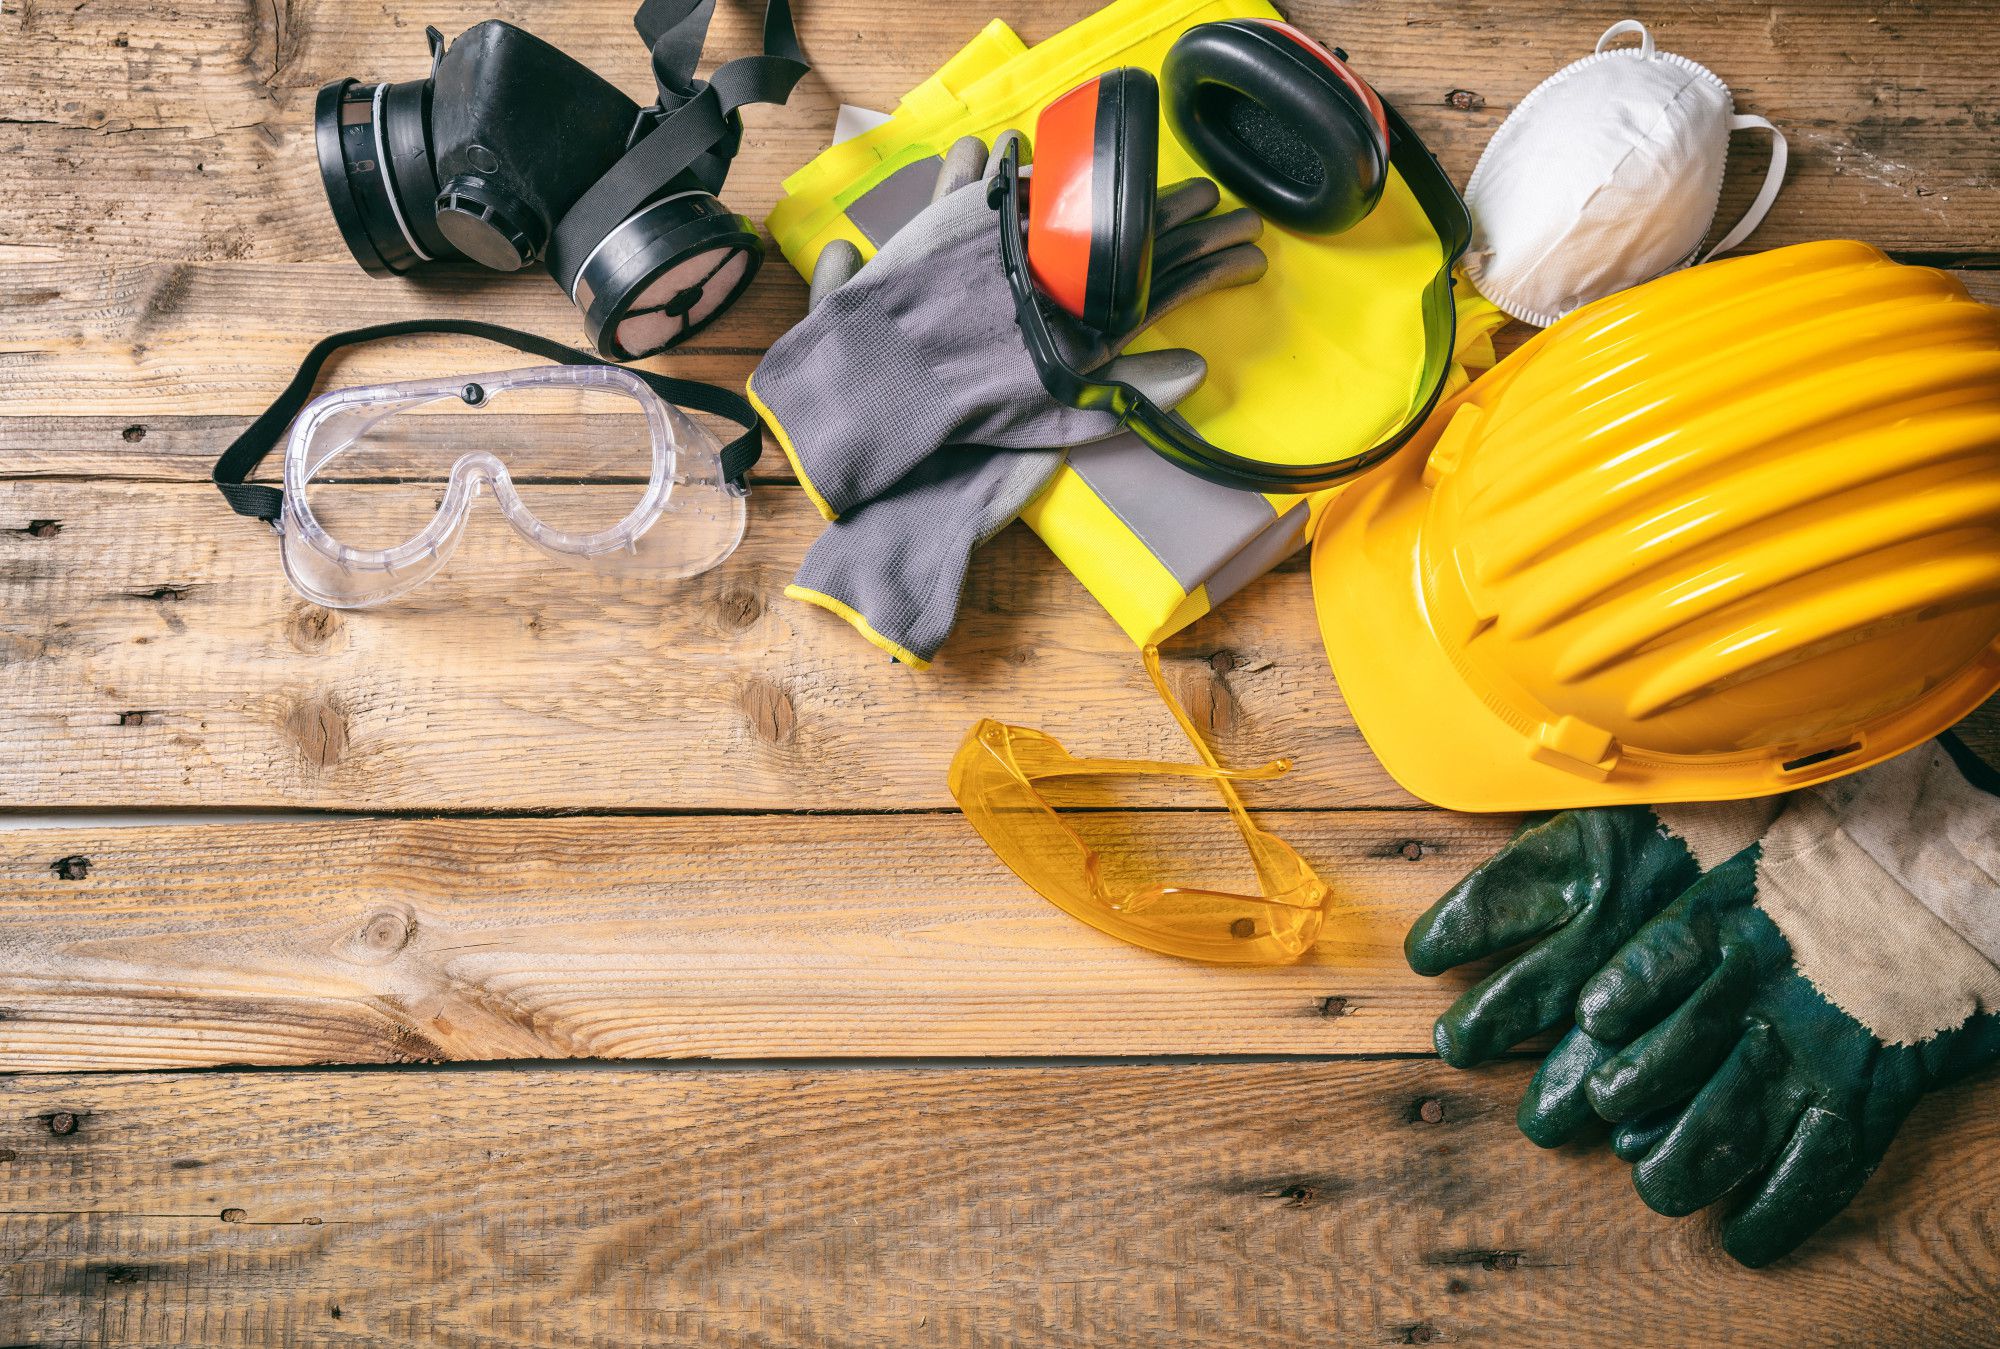 Top 10 Construction Safety Tips You Should Know